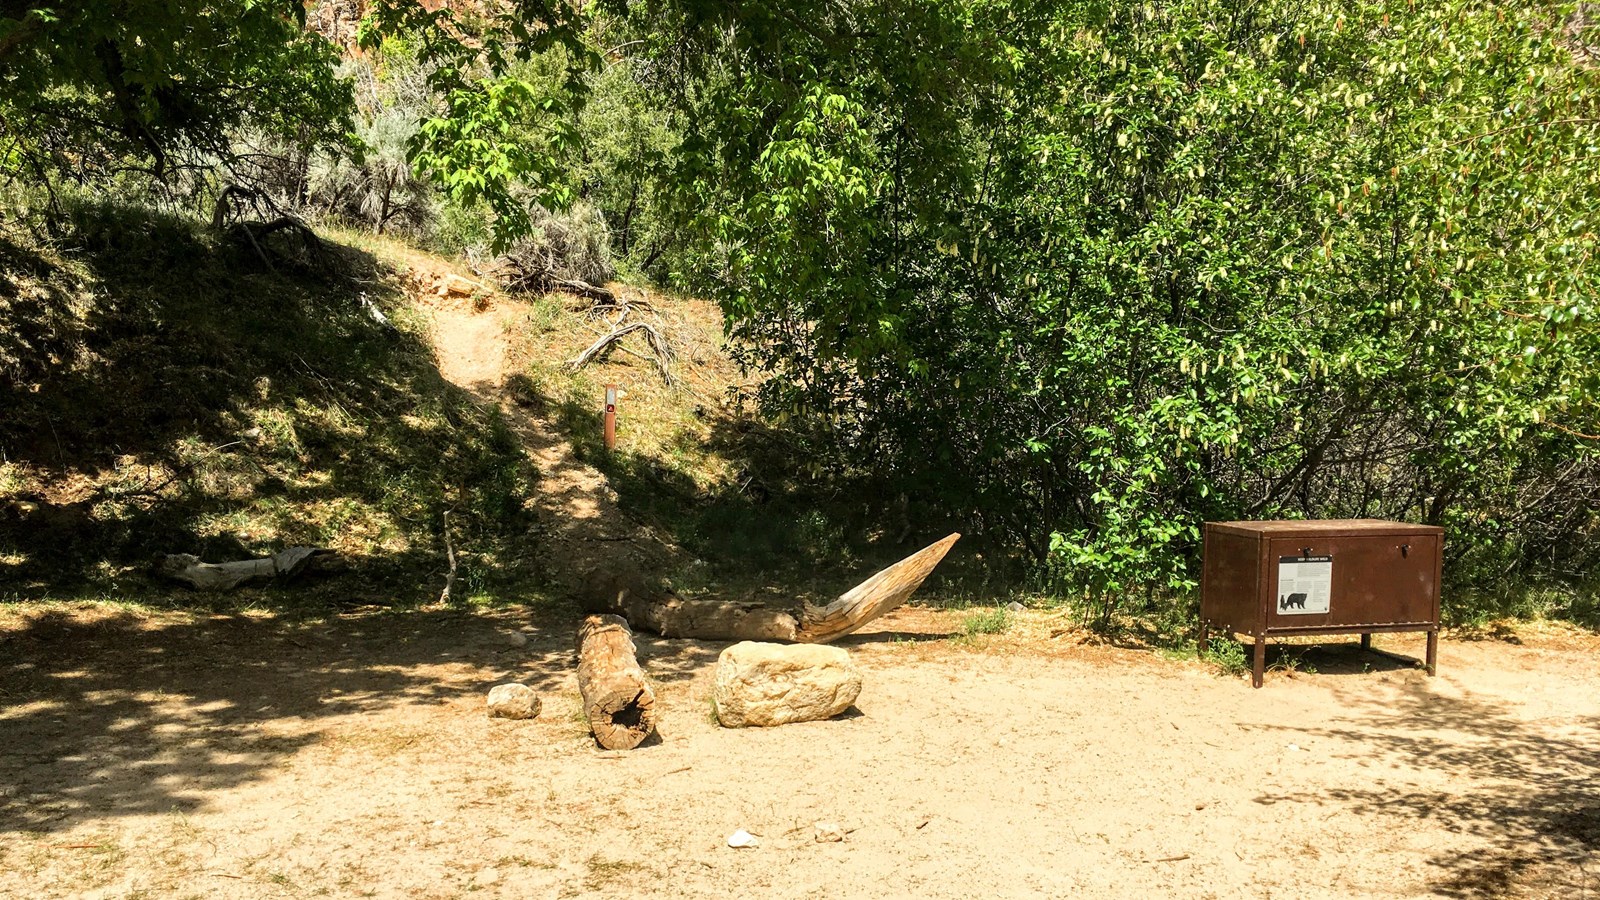 A barren patch of dirt for tents with a bear locker and logs for sitting.